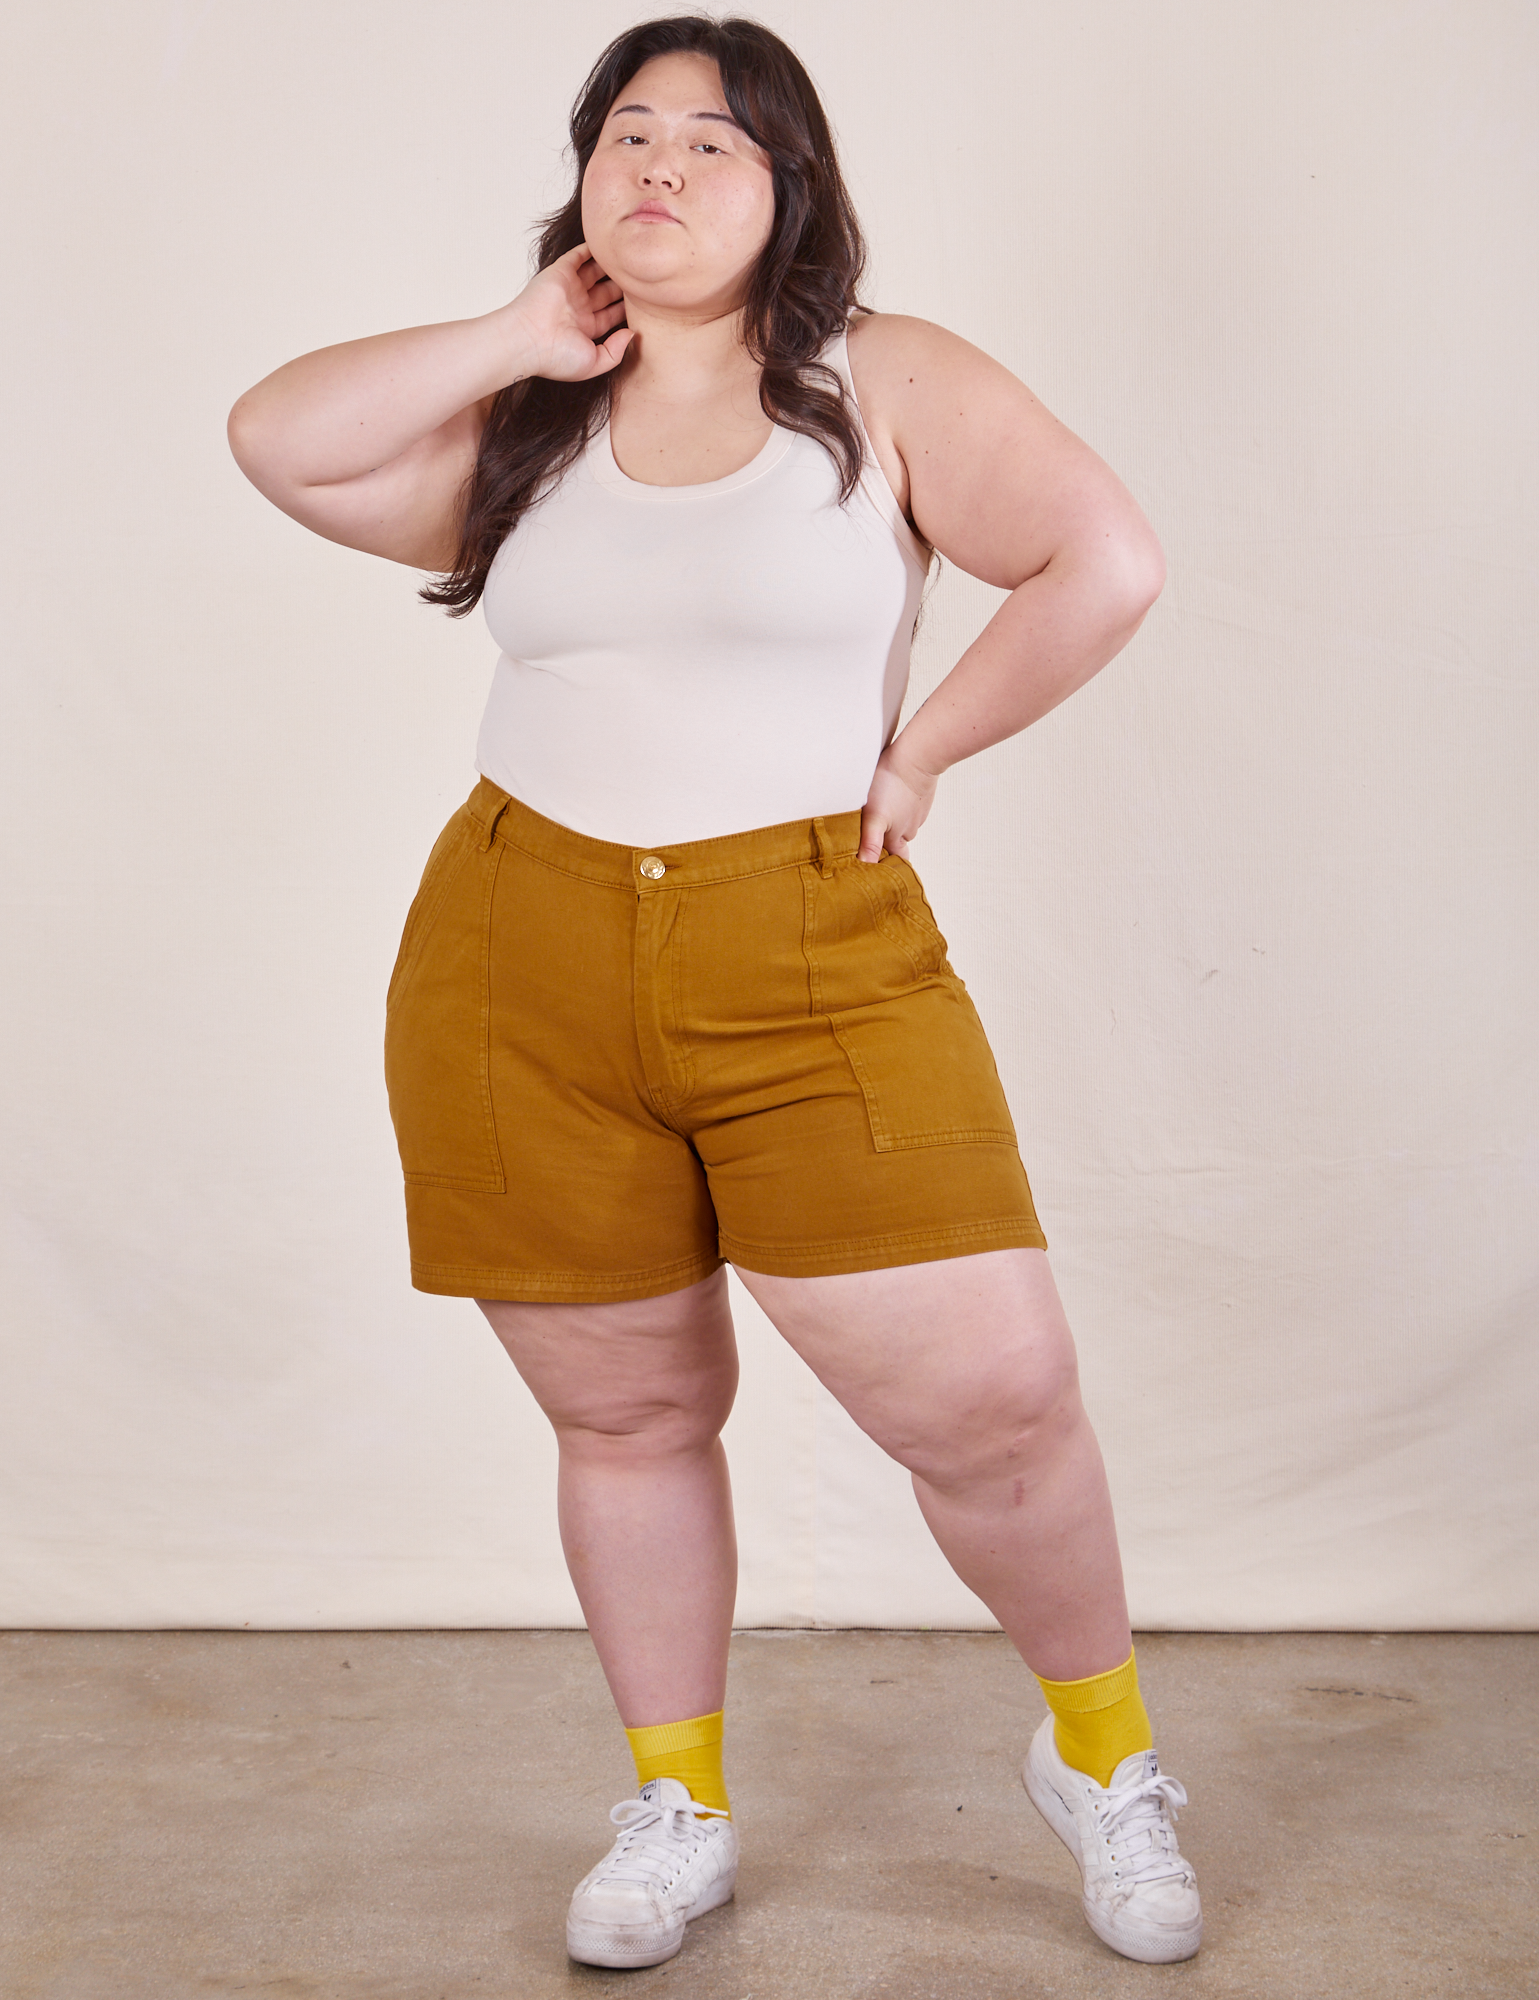 Ashley is 5’7” and wearing 1XL Classic Work Shorts in Spicy Mustard paired with a Tank Top in vintage tee off-white